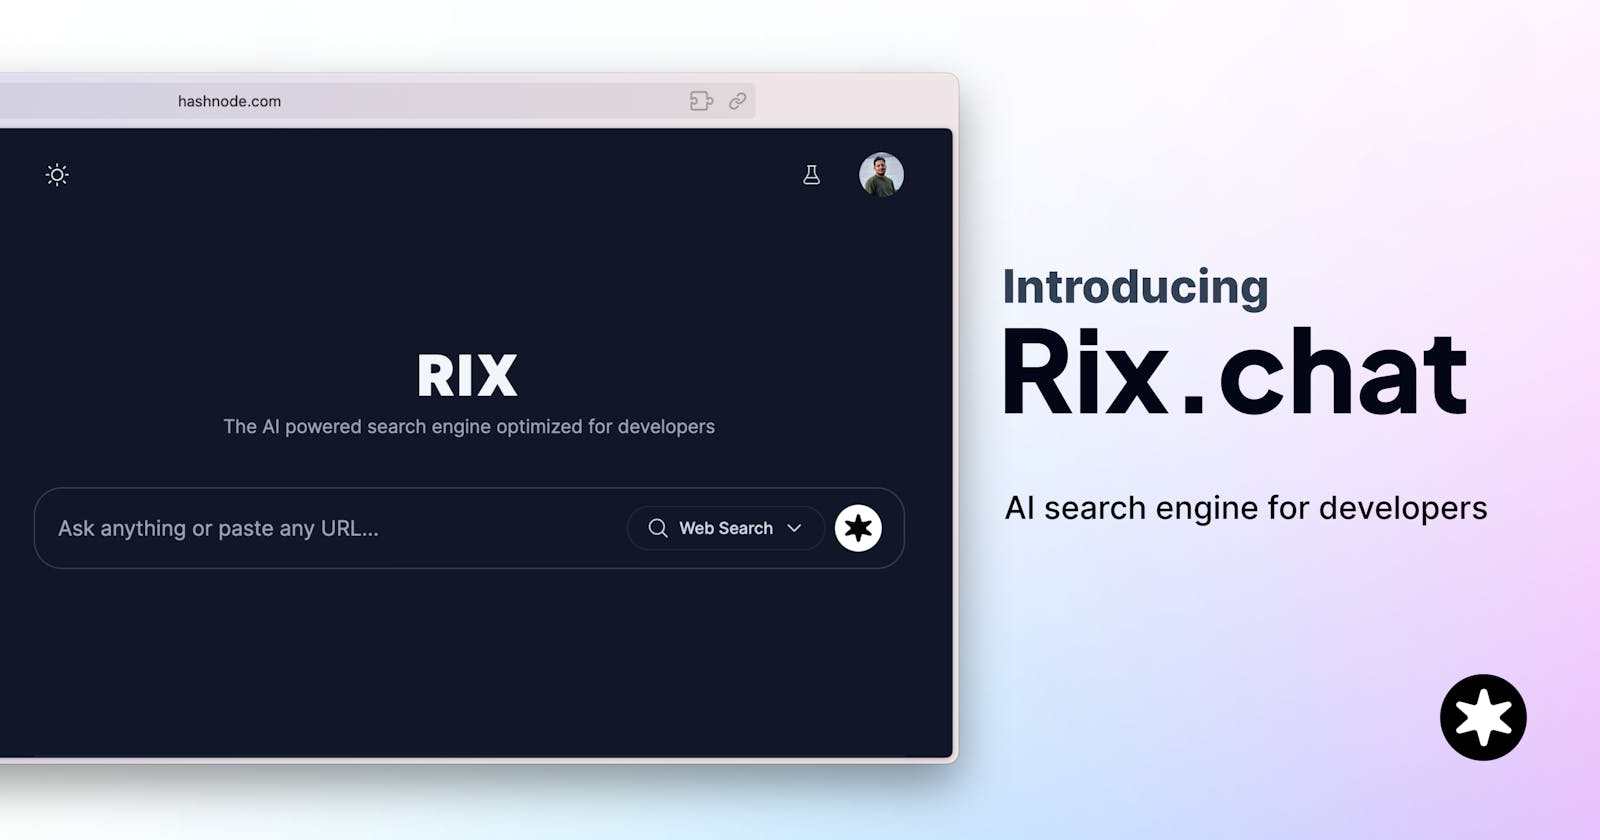 Launching Rix.chat: An AI search engine for developers